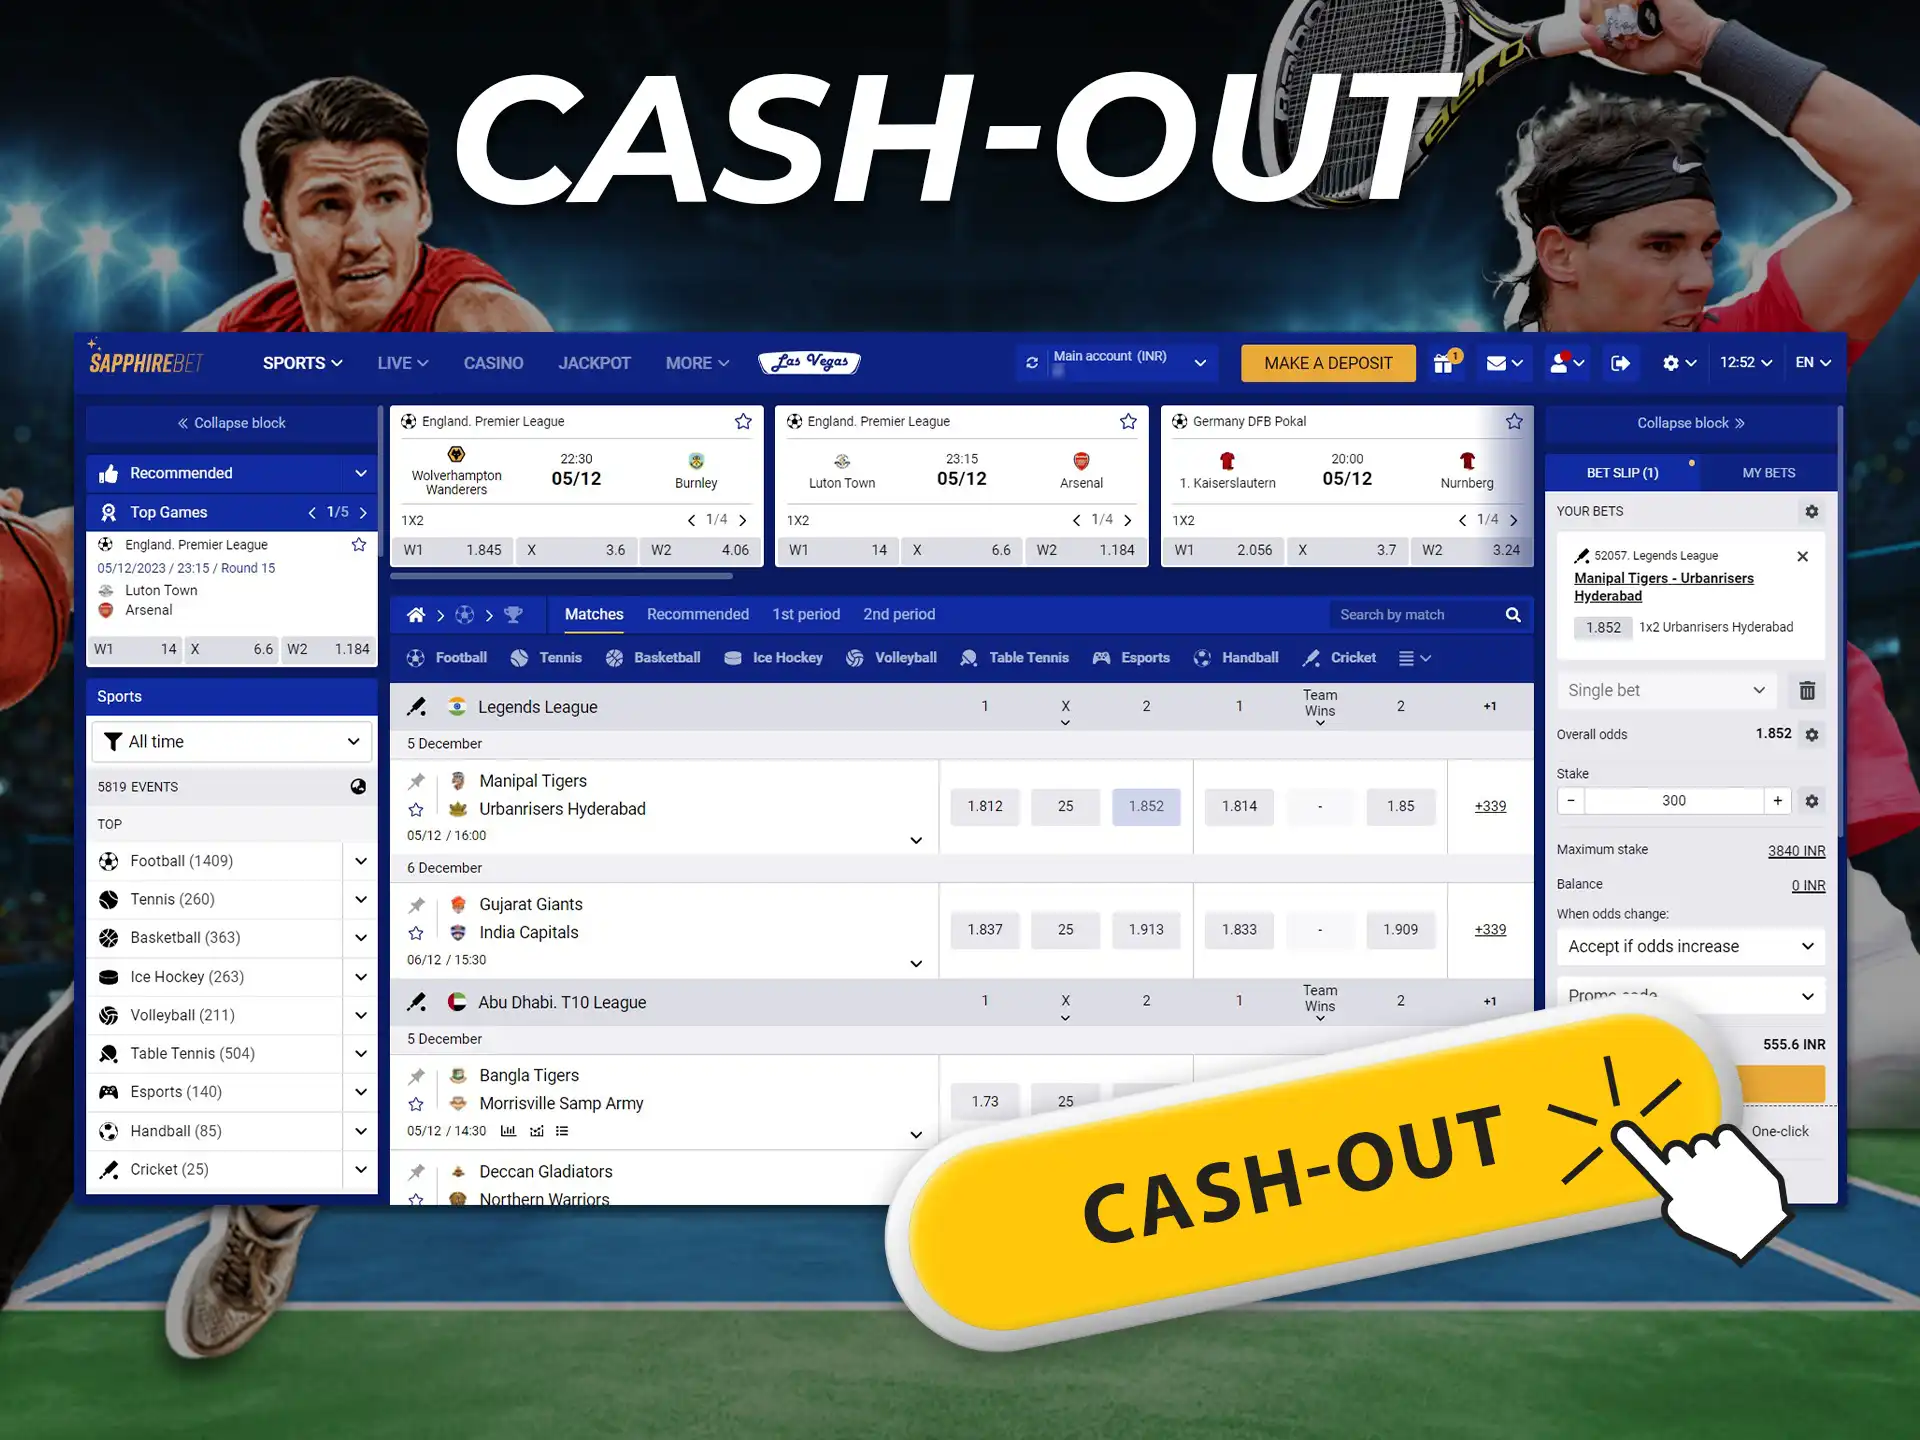 The player can calculate his bet before the end of the event in Cash-Out.